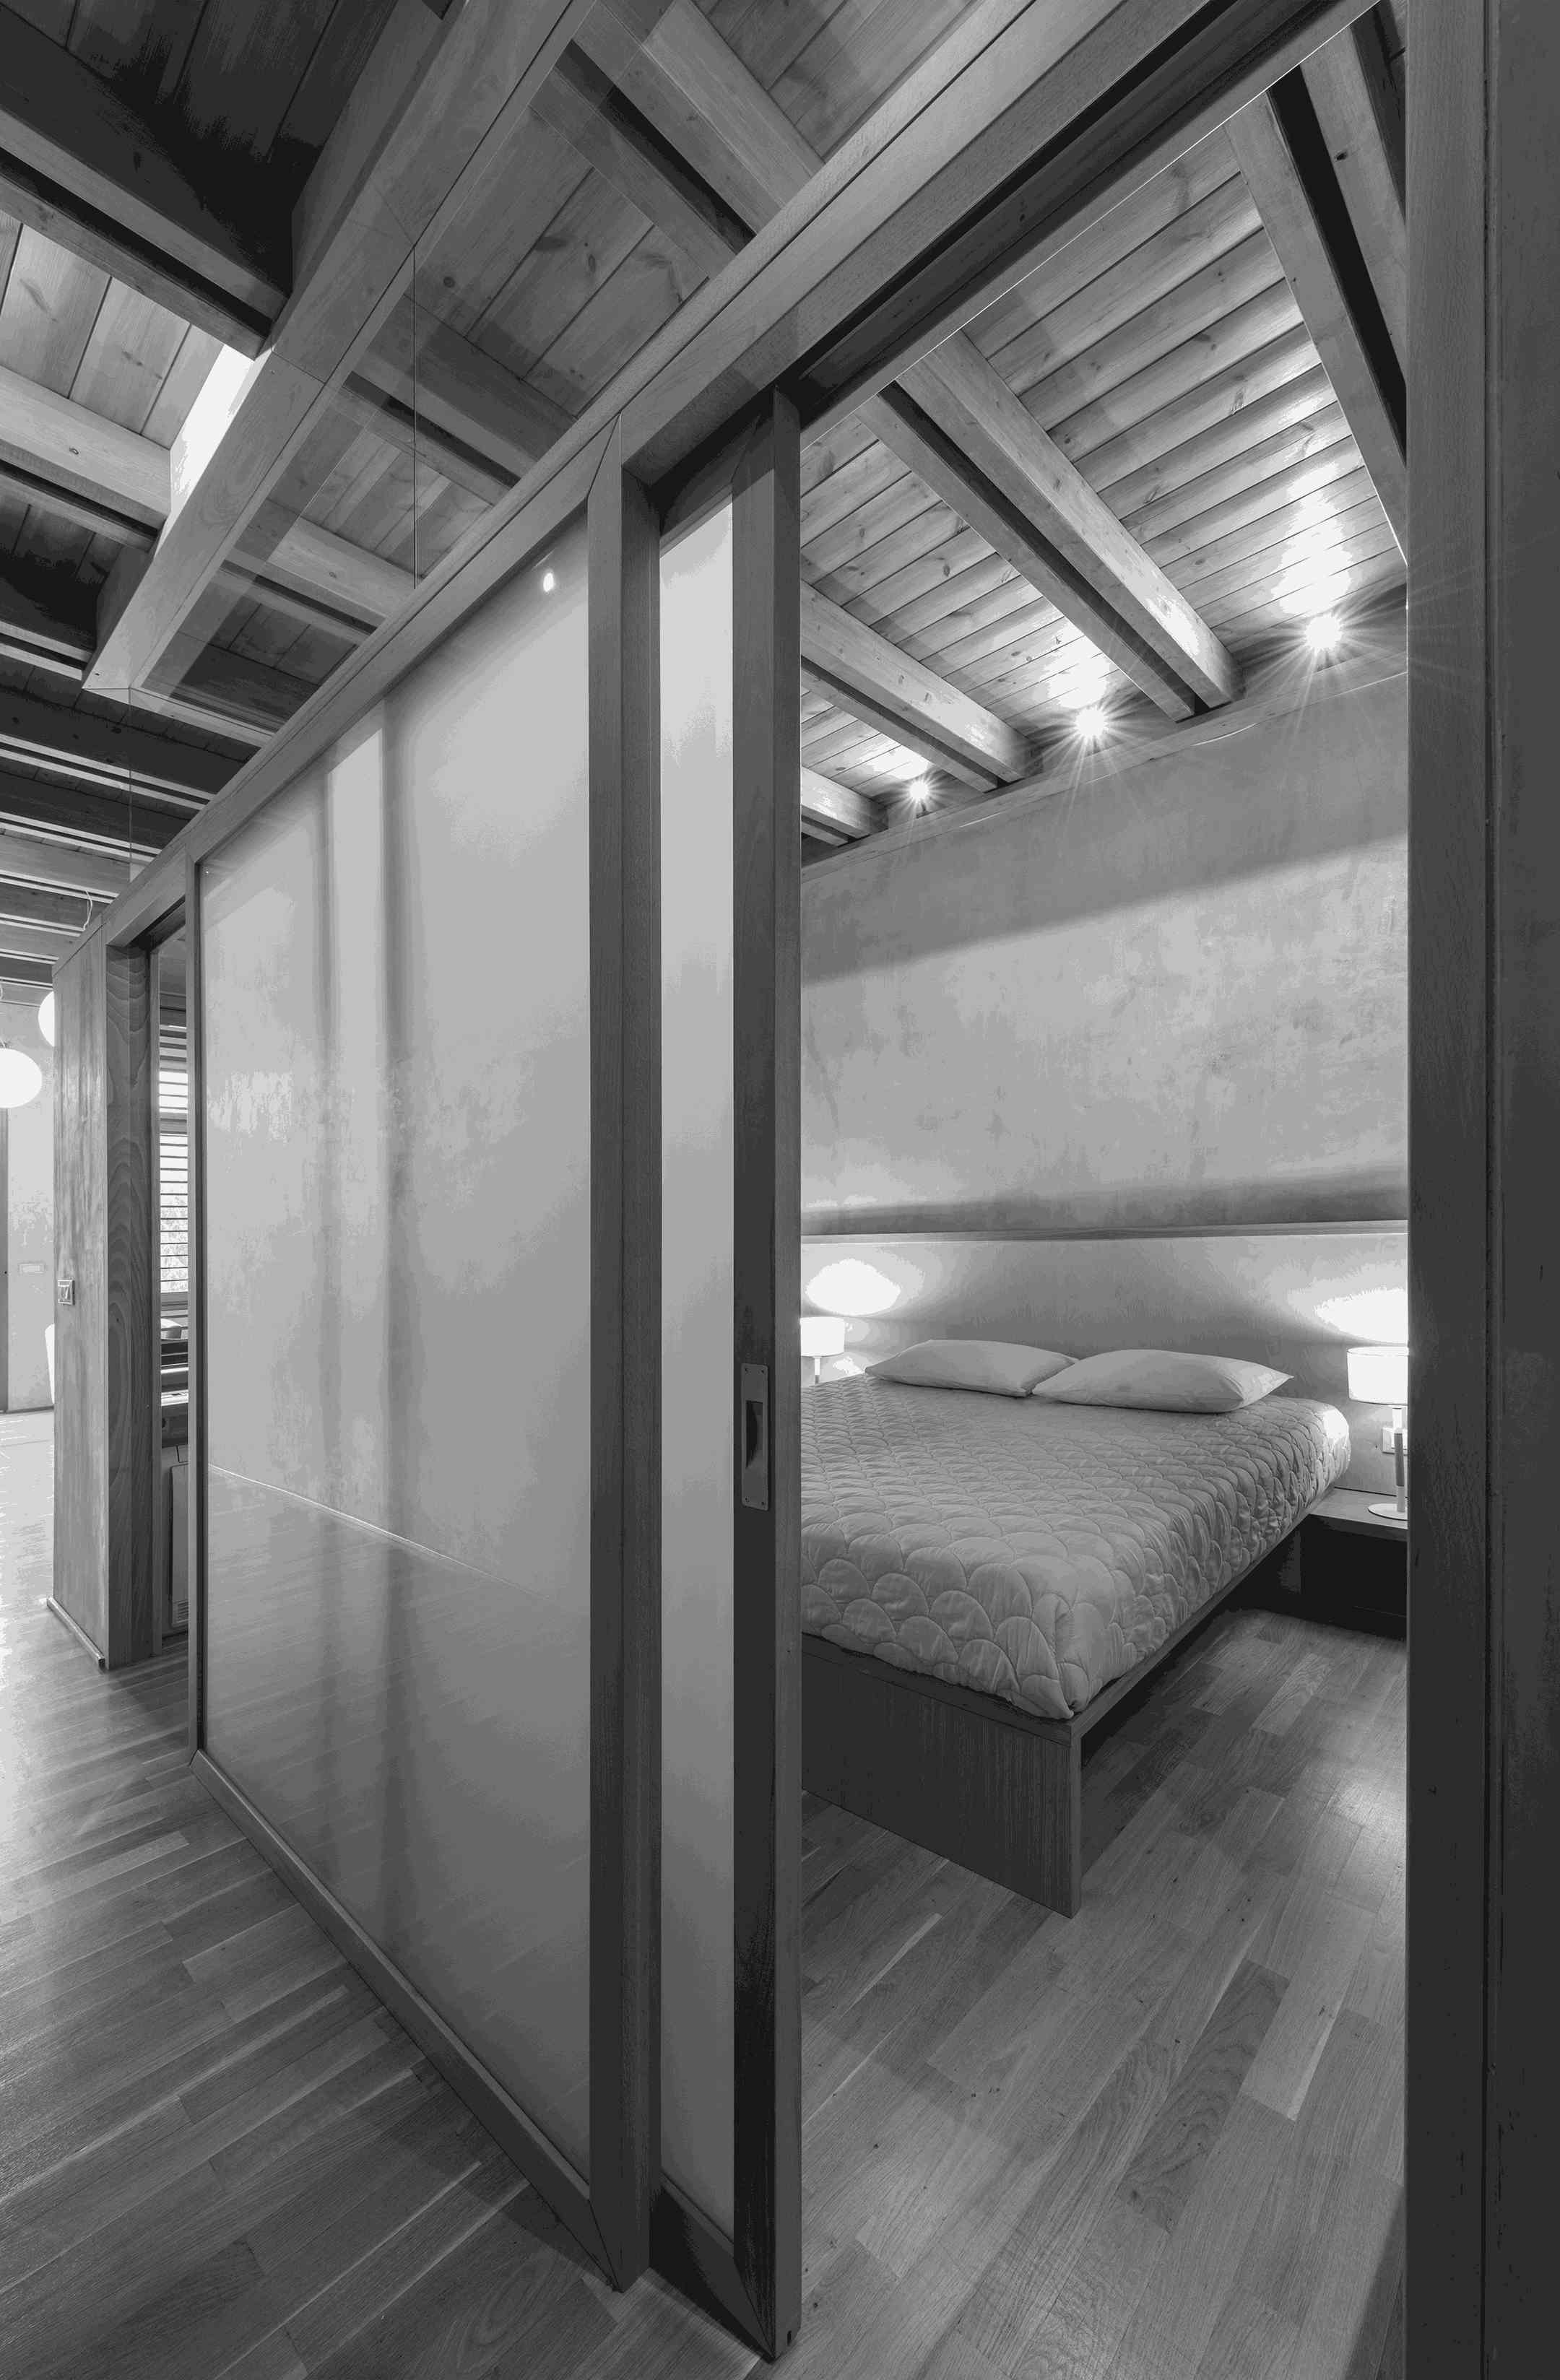 Rehabilitation of Two Buildings and Reuse as a Small Hotel in Chania, Crete by I.K. Verikakis Architectural Office No10